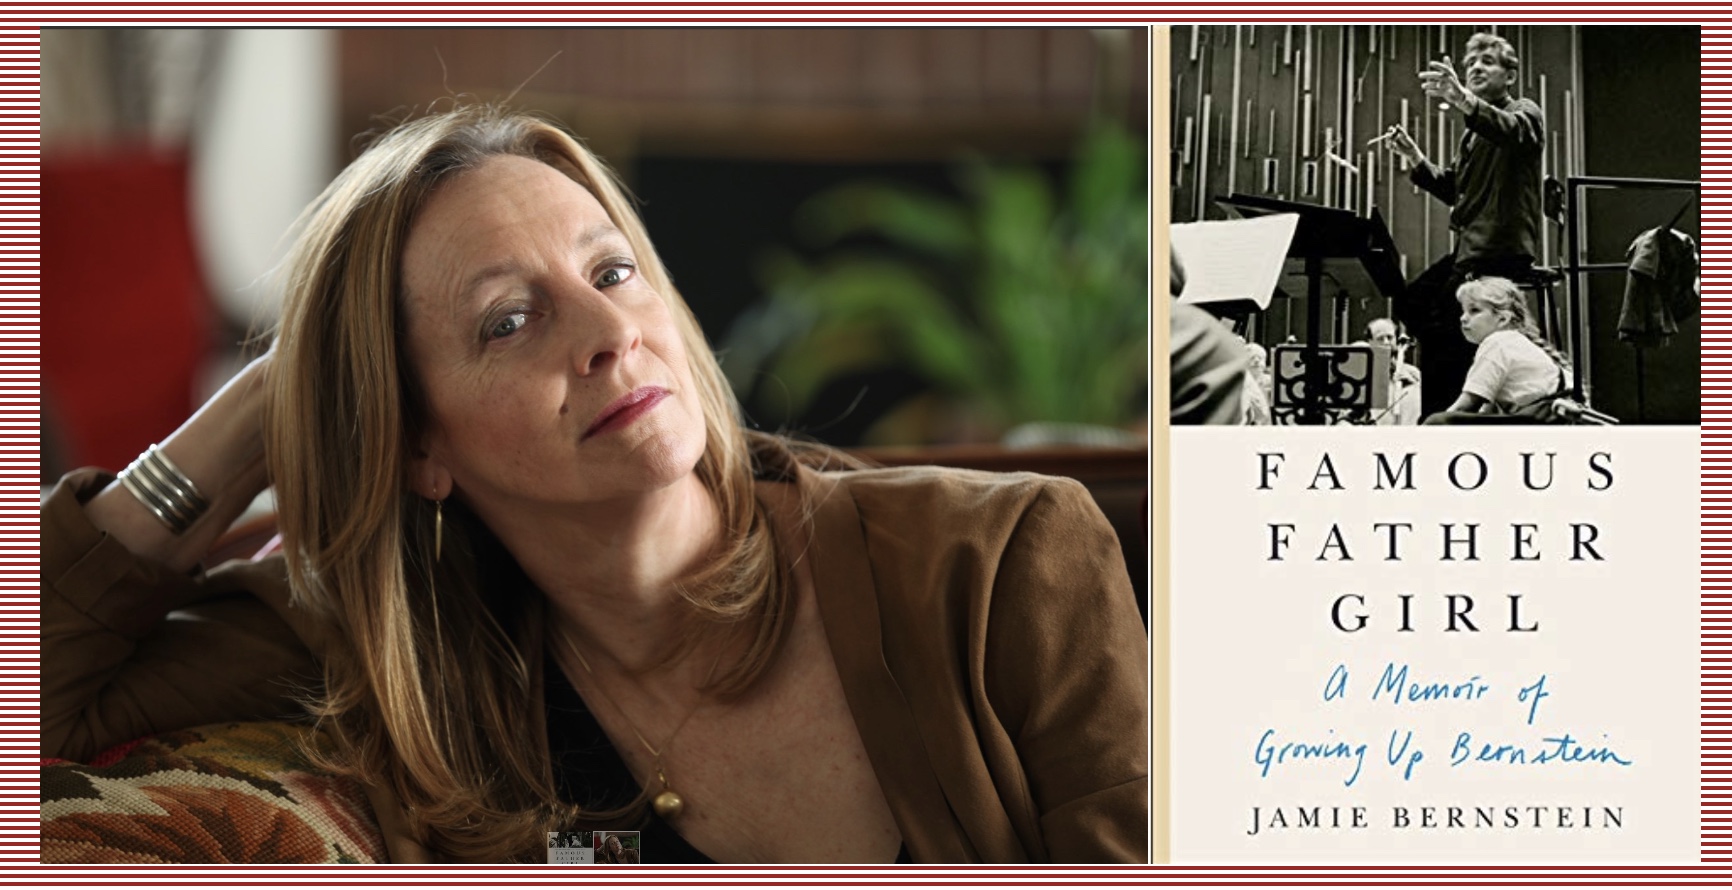 image of the author, Jamie Bernstein, and her book, Famous Father Girl